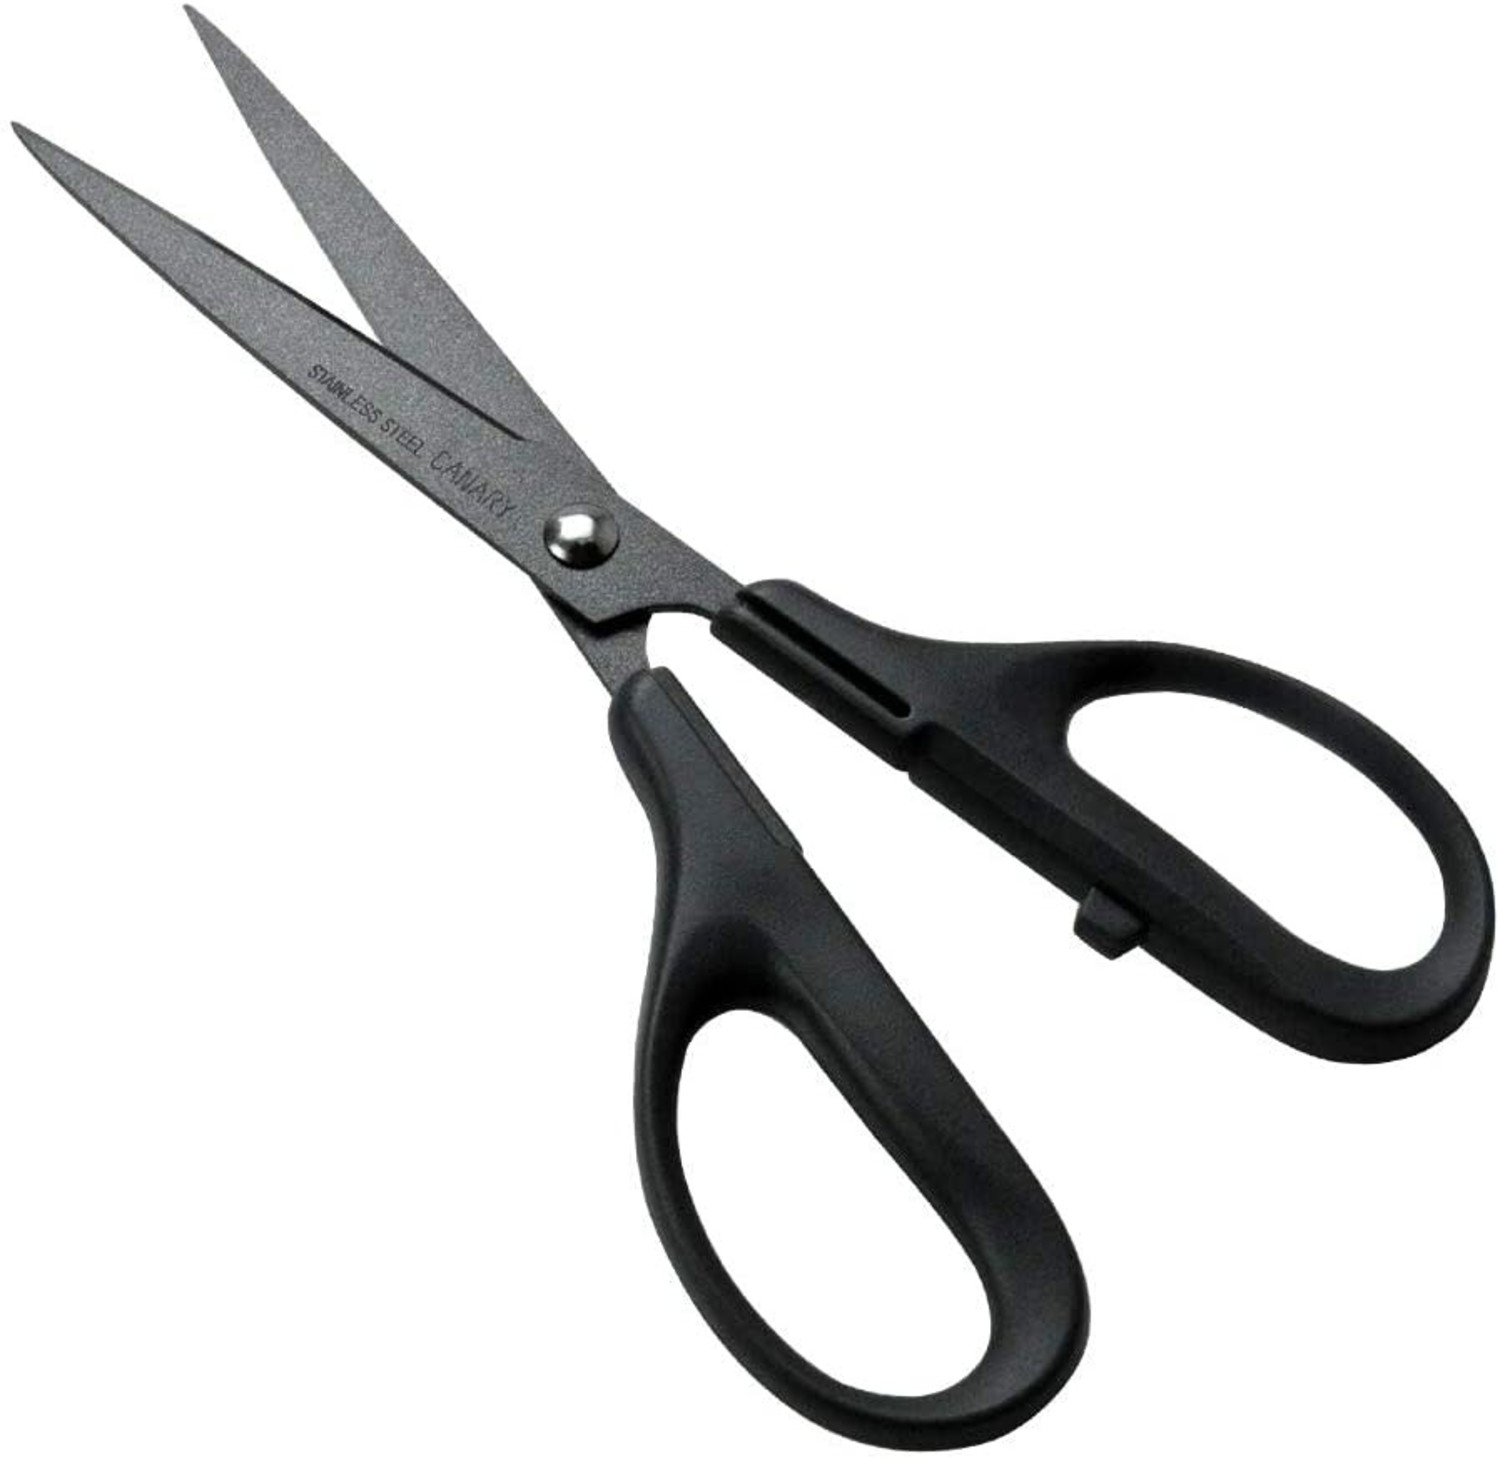 CANARY Stainless Steel Take-Apart Kitchen Scissors